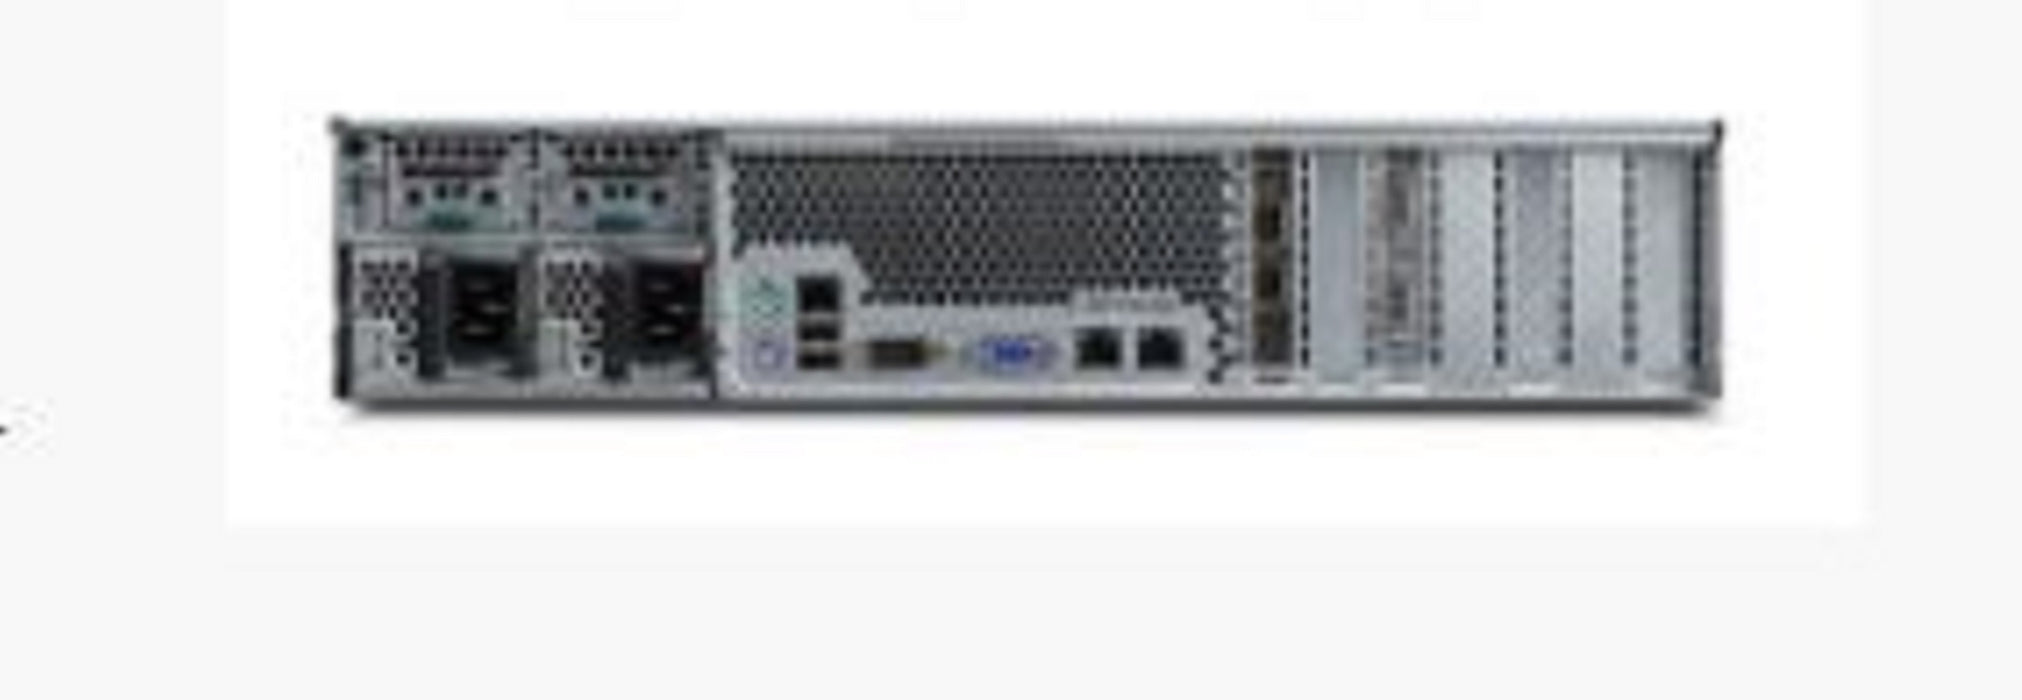 Isilon X200 120TB 5-Node Cluster with 2 x 8-Port Infiniband switches